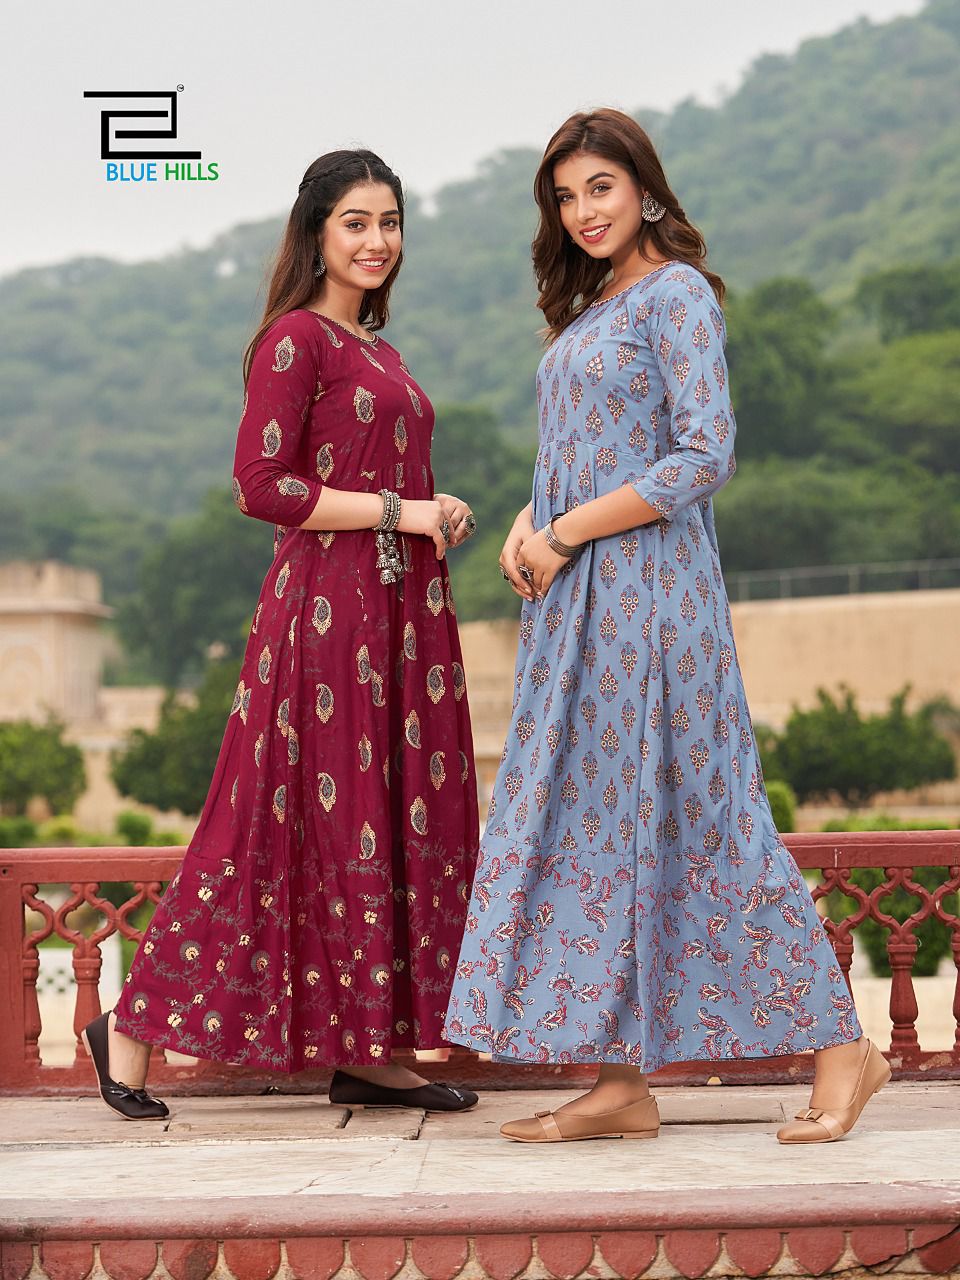 Kurtis Los Angeles: All types of wholesale kurtis supplier in Los Angeles